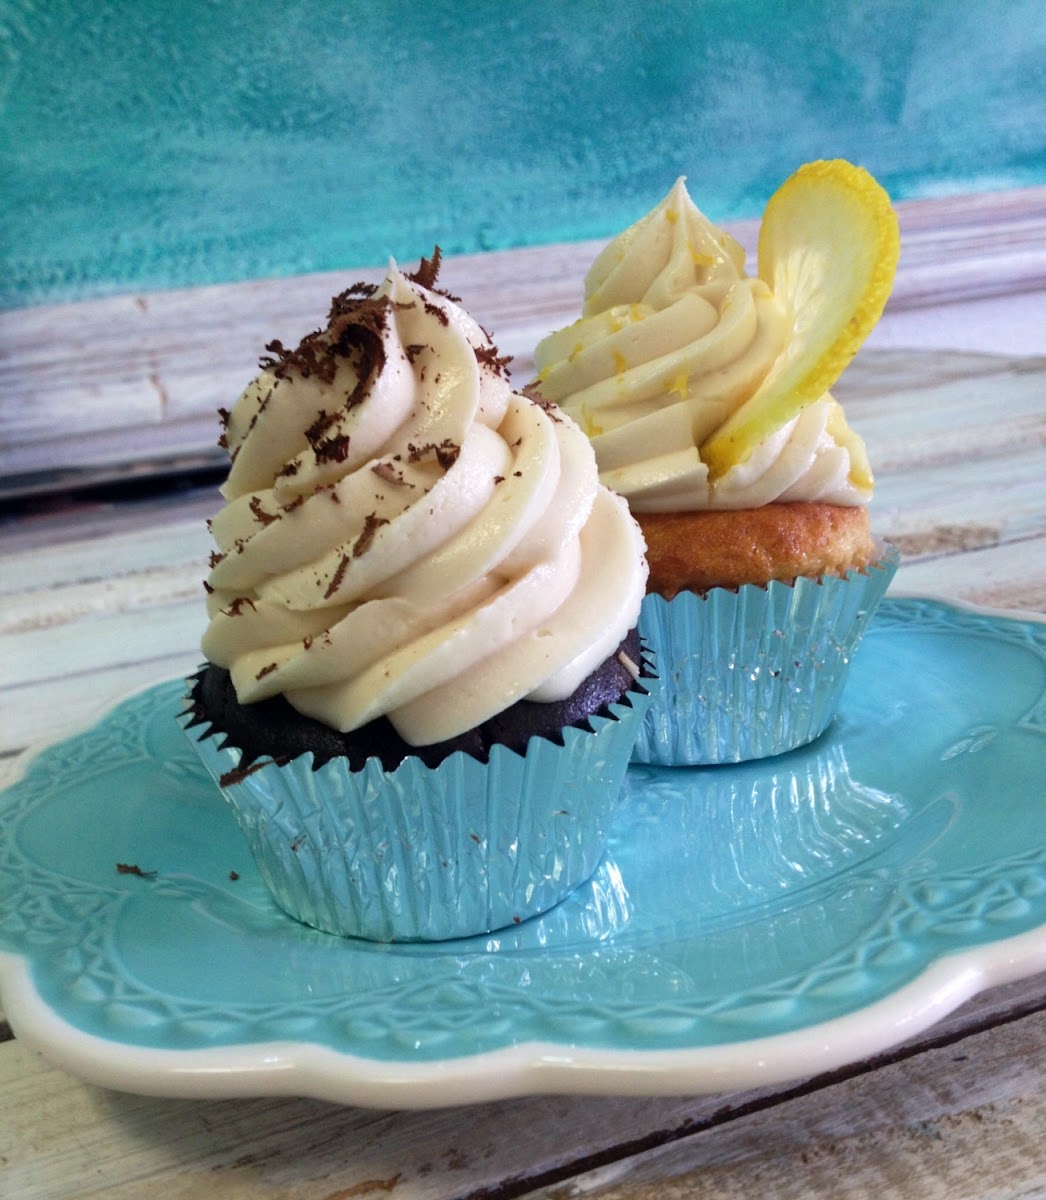 Lemon and chocolate cupcakes with vanilla frosting